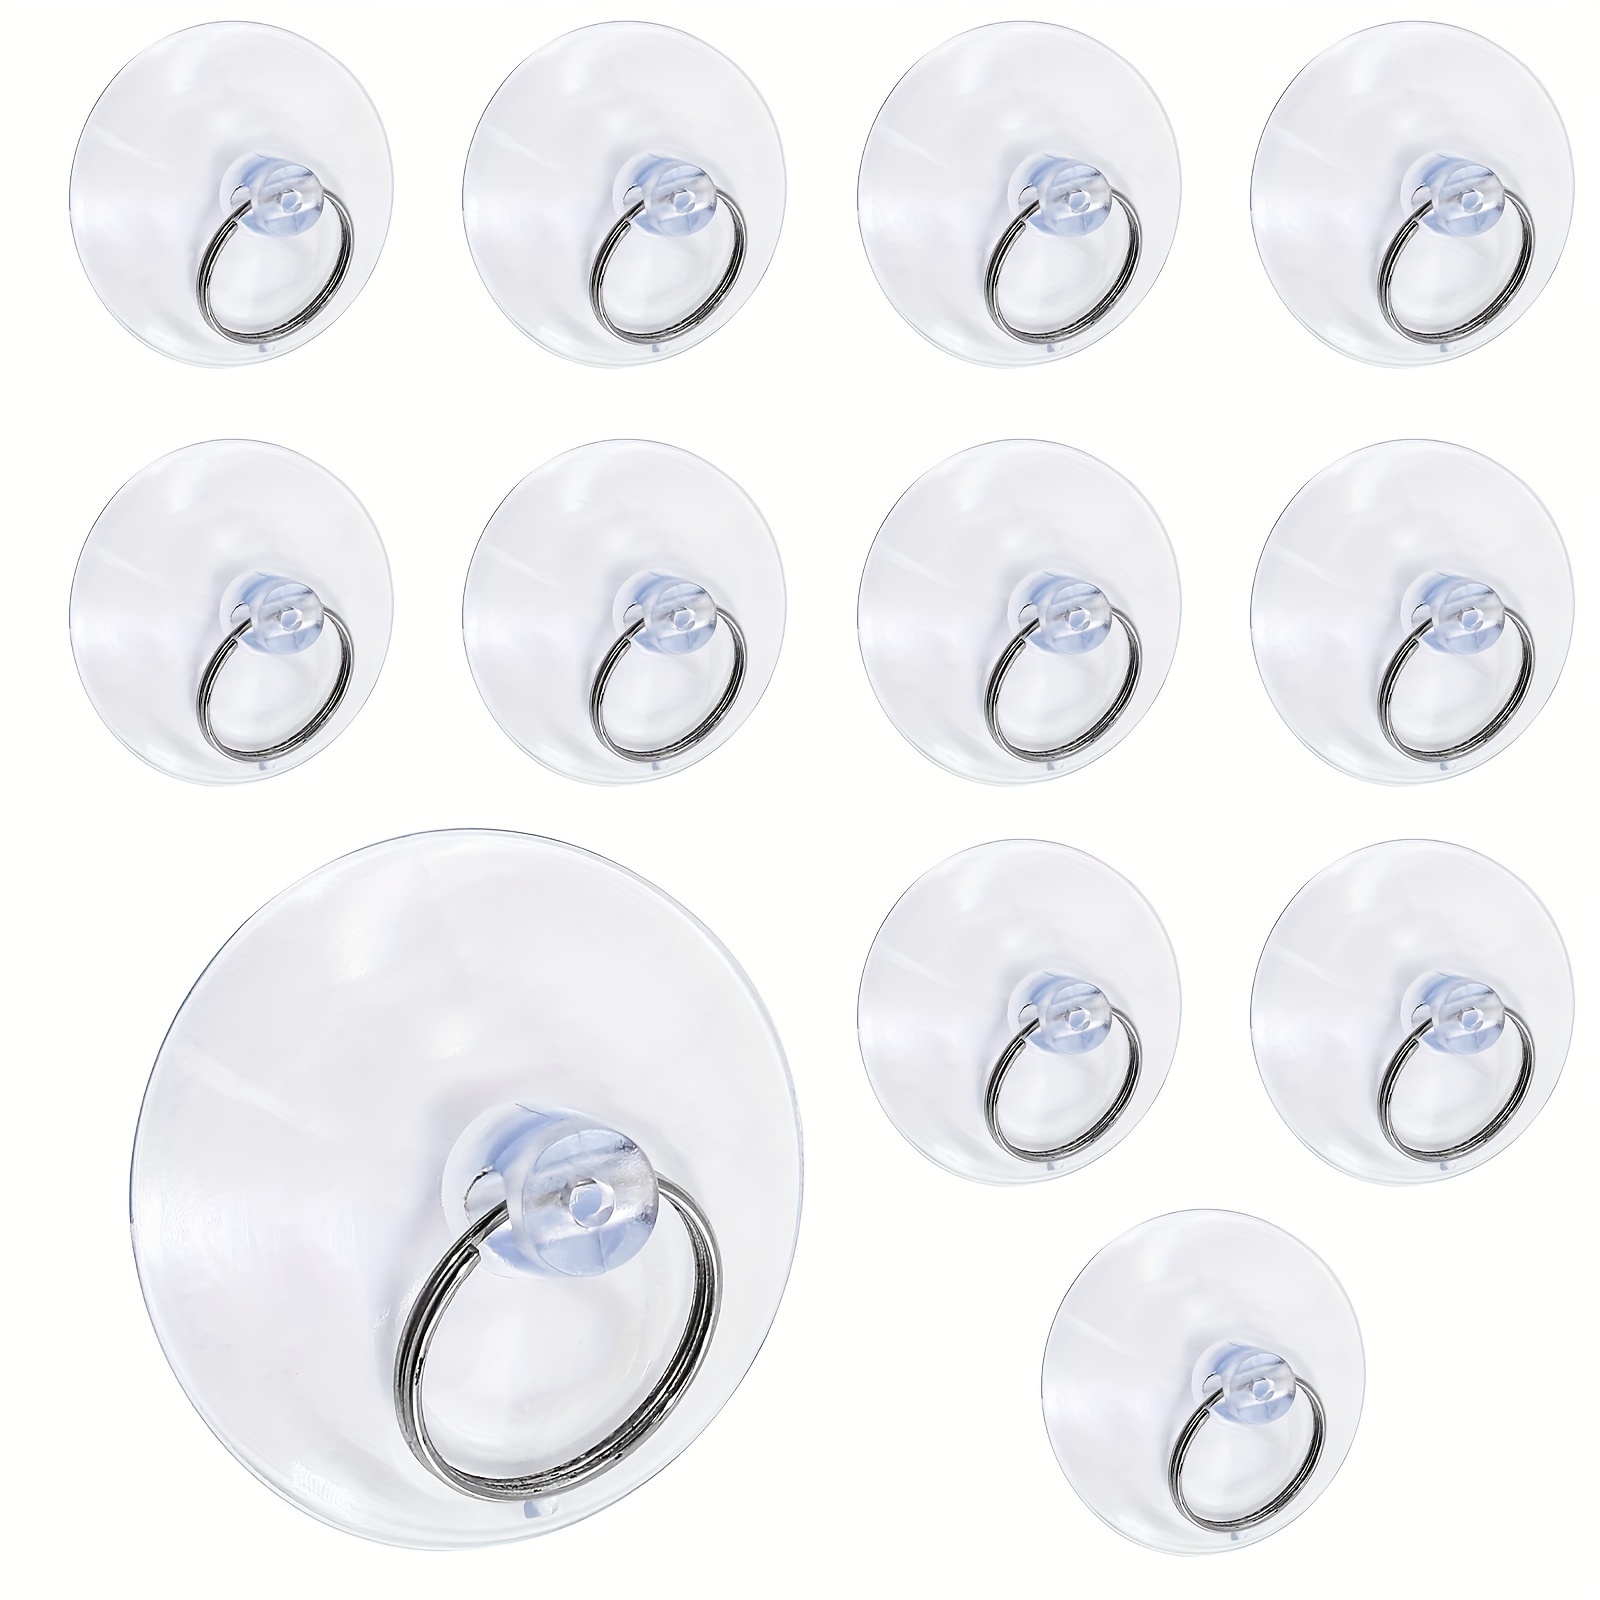 

12pcs Suction Cup With Ring, Clear Suction Cup Key Ring, Sucker Suction Hook For Window, Kitchen, Wall, Glass, Suction Cup Hook For Hanging